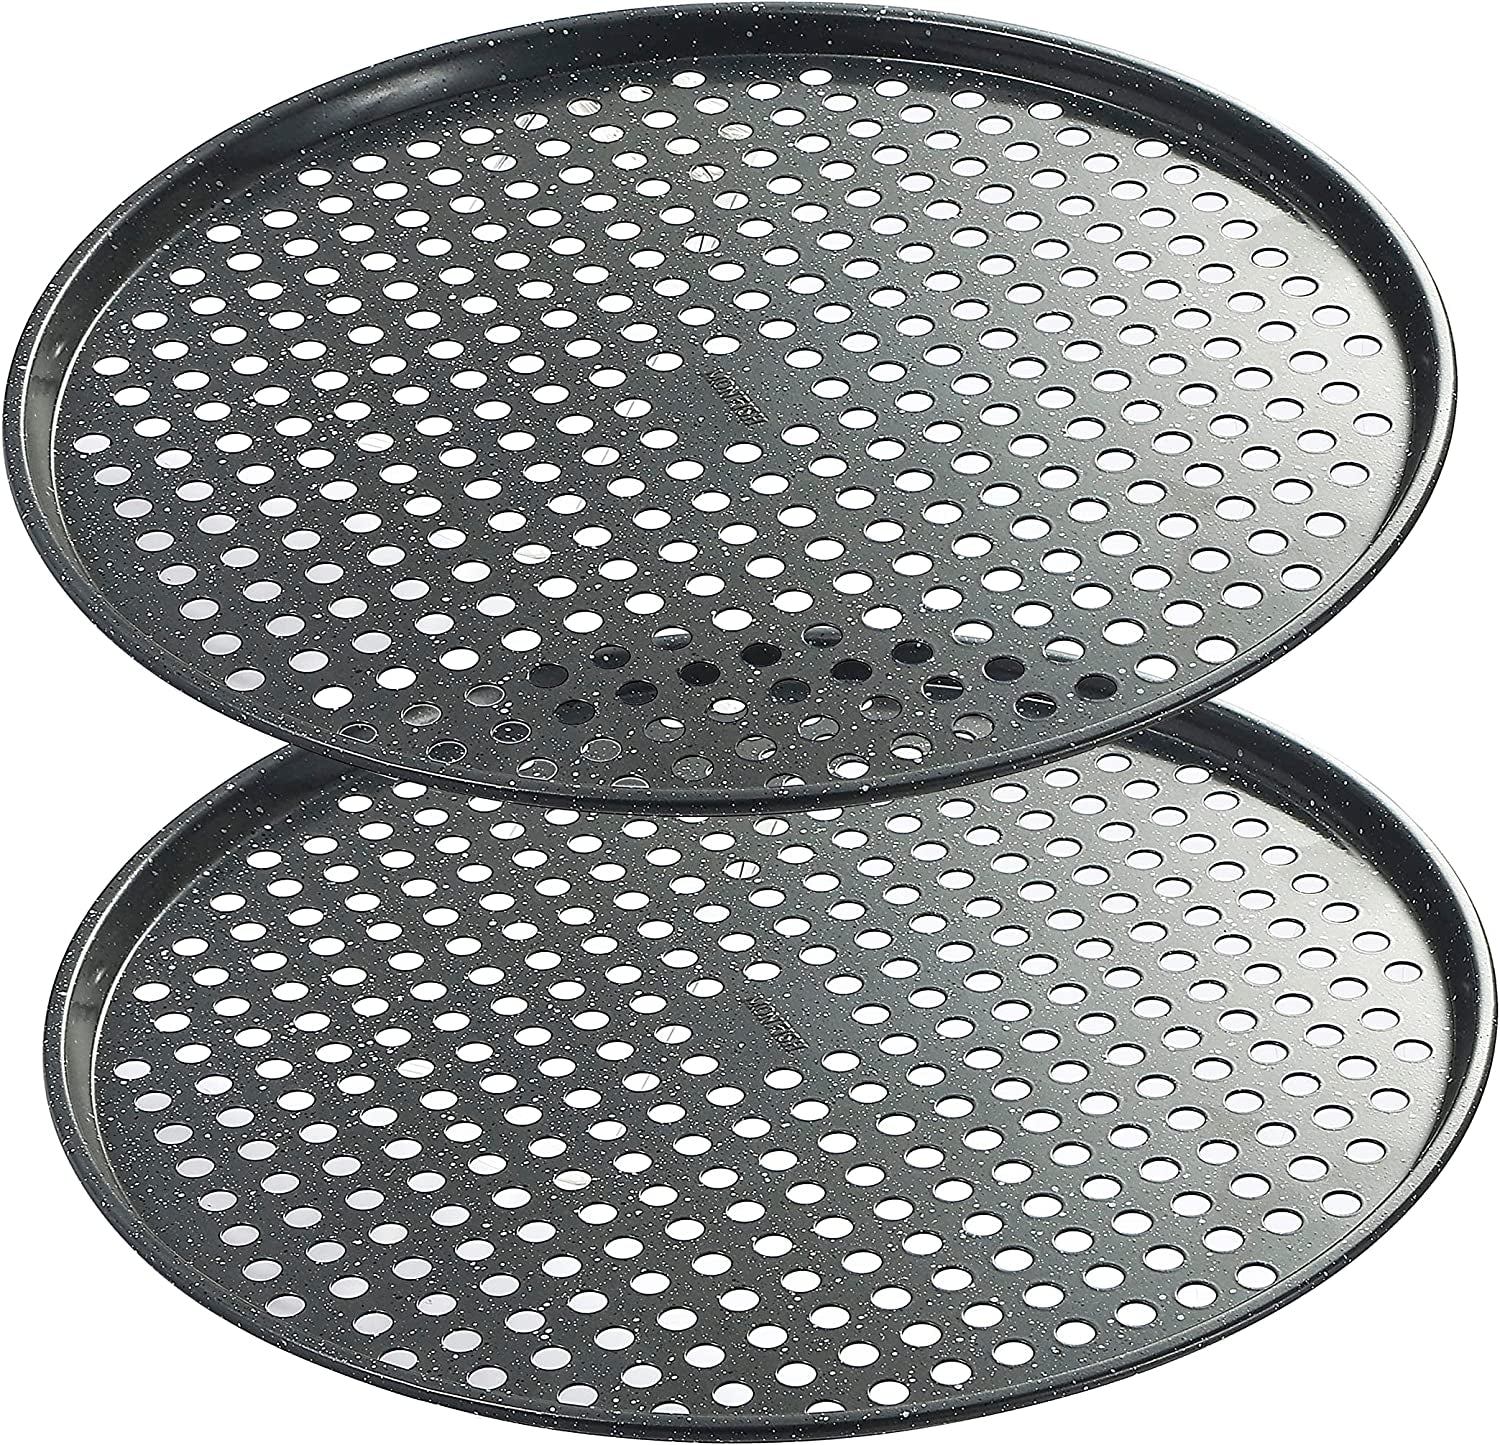 14 Inch Pizza Tray with Holes 2 Pack Perforated Pizza Pan for Oven Carbon Steel Crisper Pan Granite Finish Non Stick